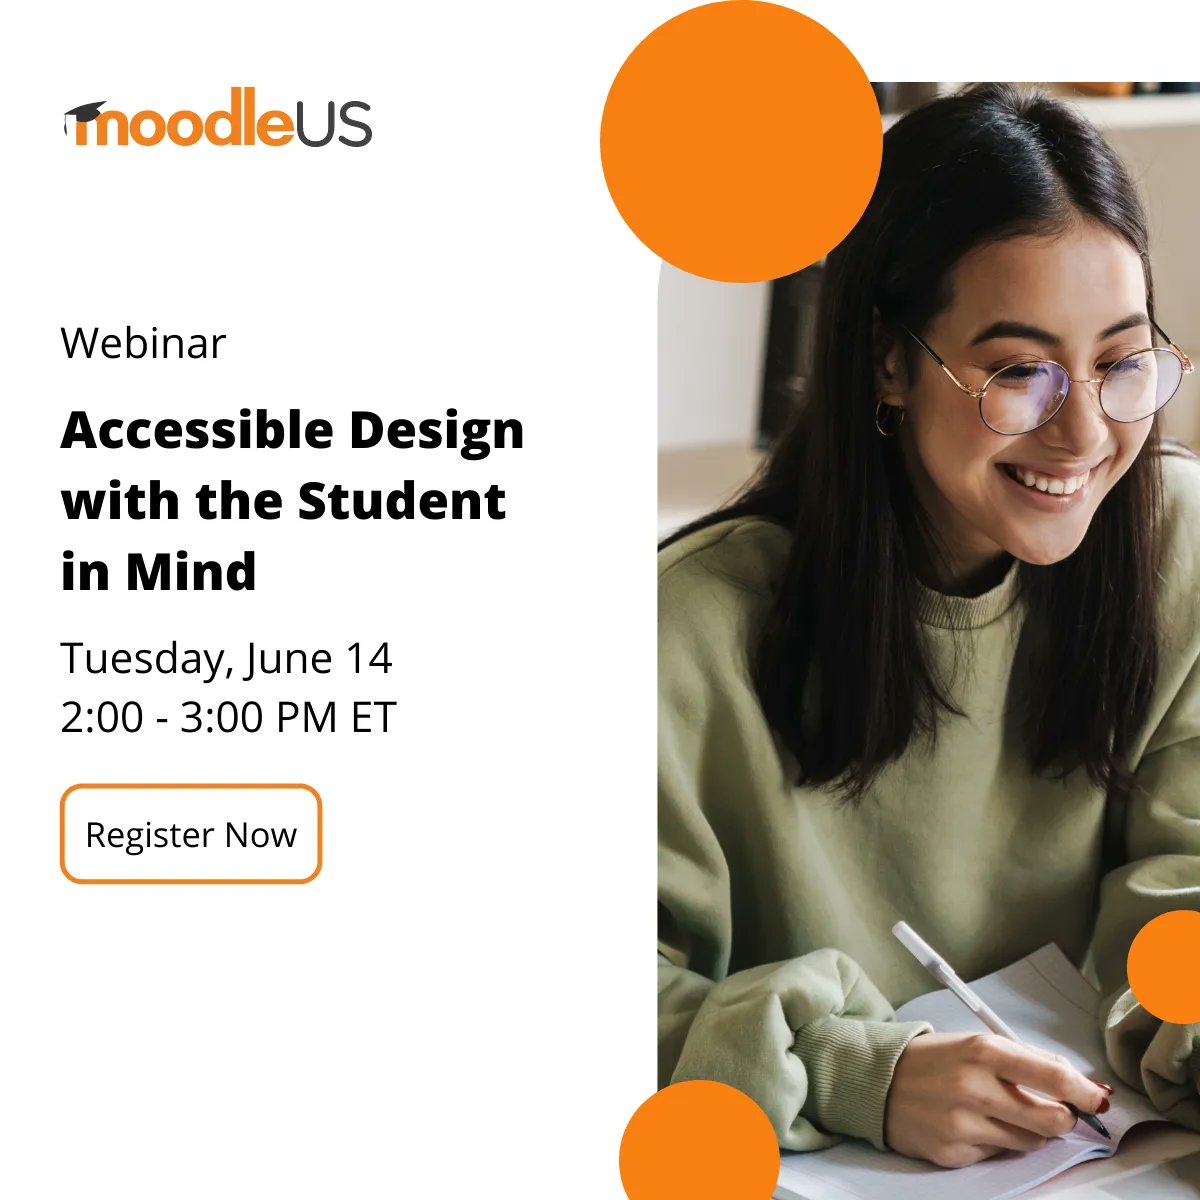 Accessibility is often an afterthought in online course design. Learn how to make your courses accessible for all students from the very start in our next webinar on 6/14 buff.ly/3MRorMu #accessibledesign #Moodle #learningdesign